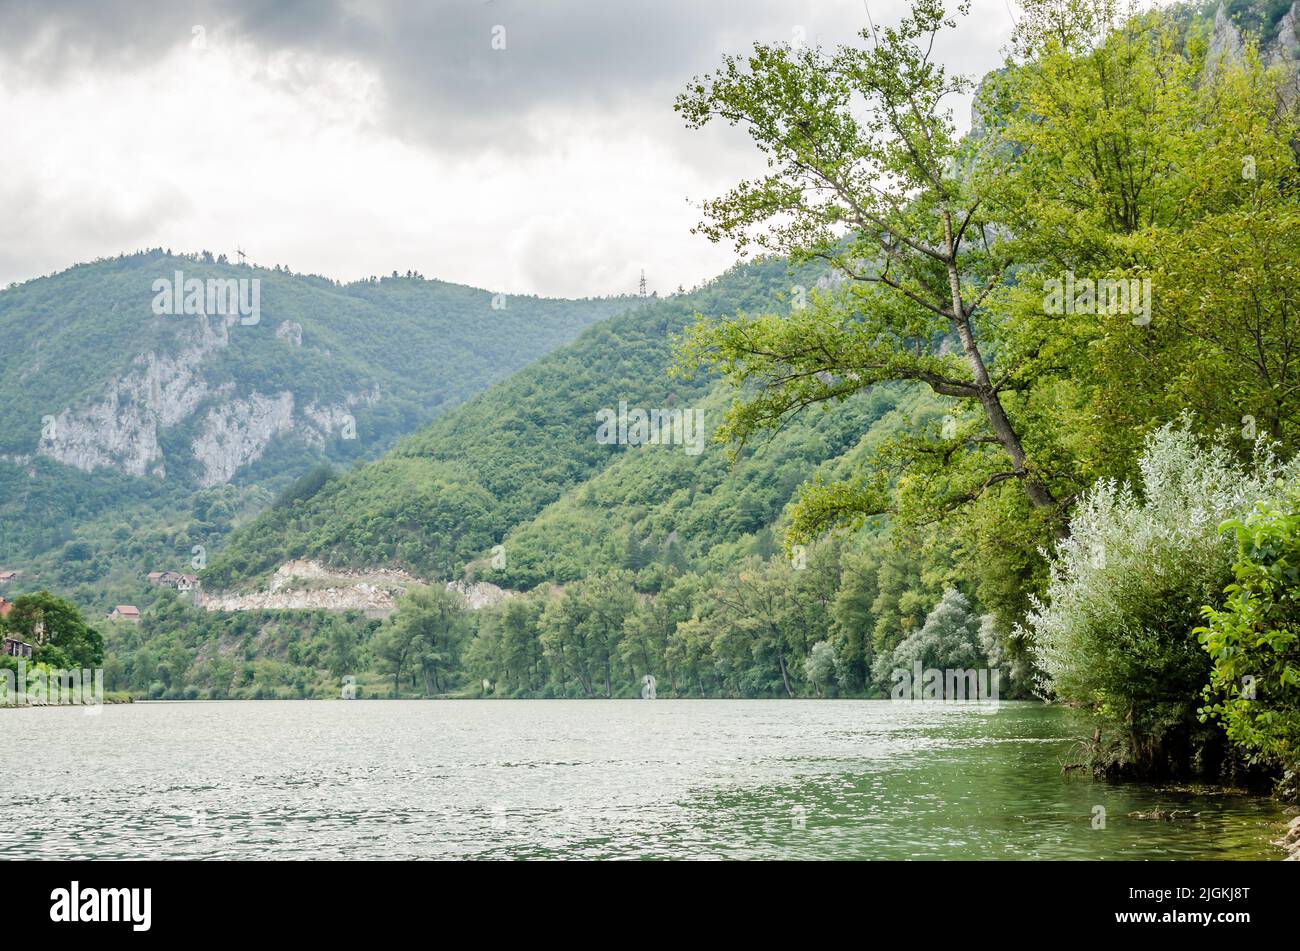 August 16, 2014. Visegrad, Sarajevo - Bosnia and Herzegovina. Bosnia and Herzegovina. Višegrad is a populated place located in the Drina river basin, Stock Photo